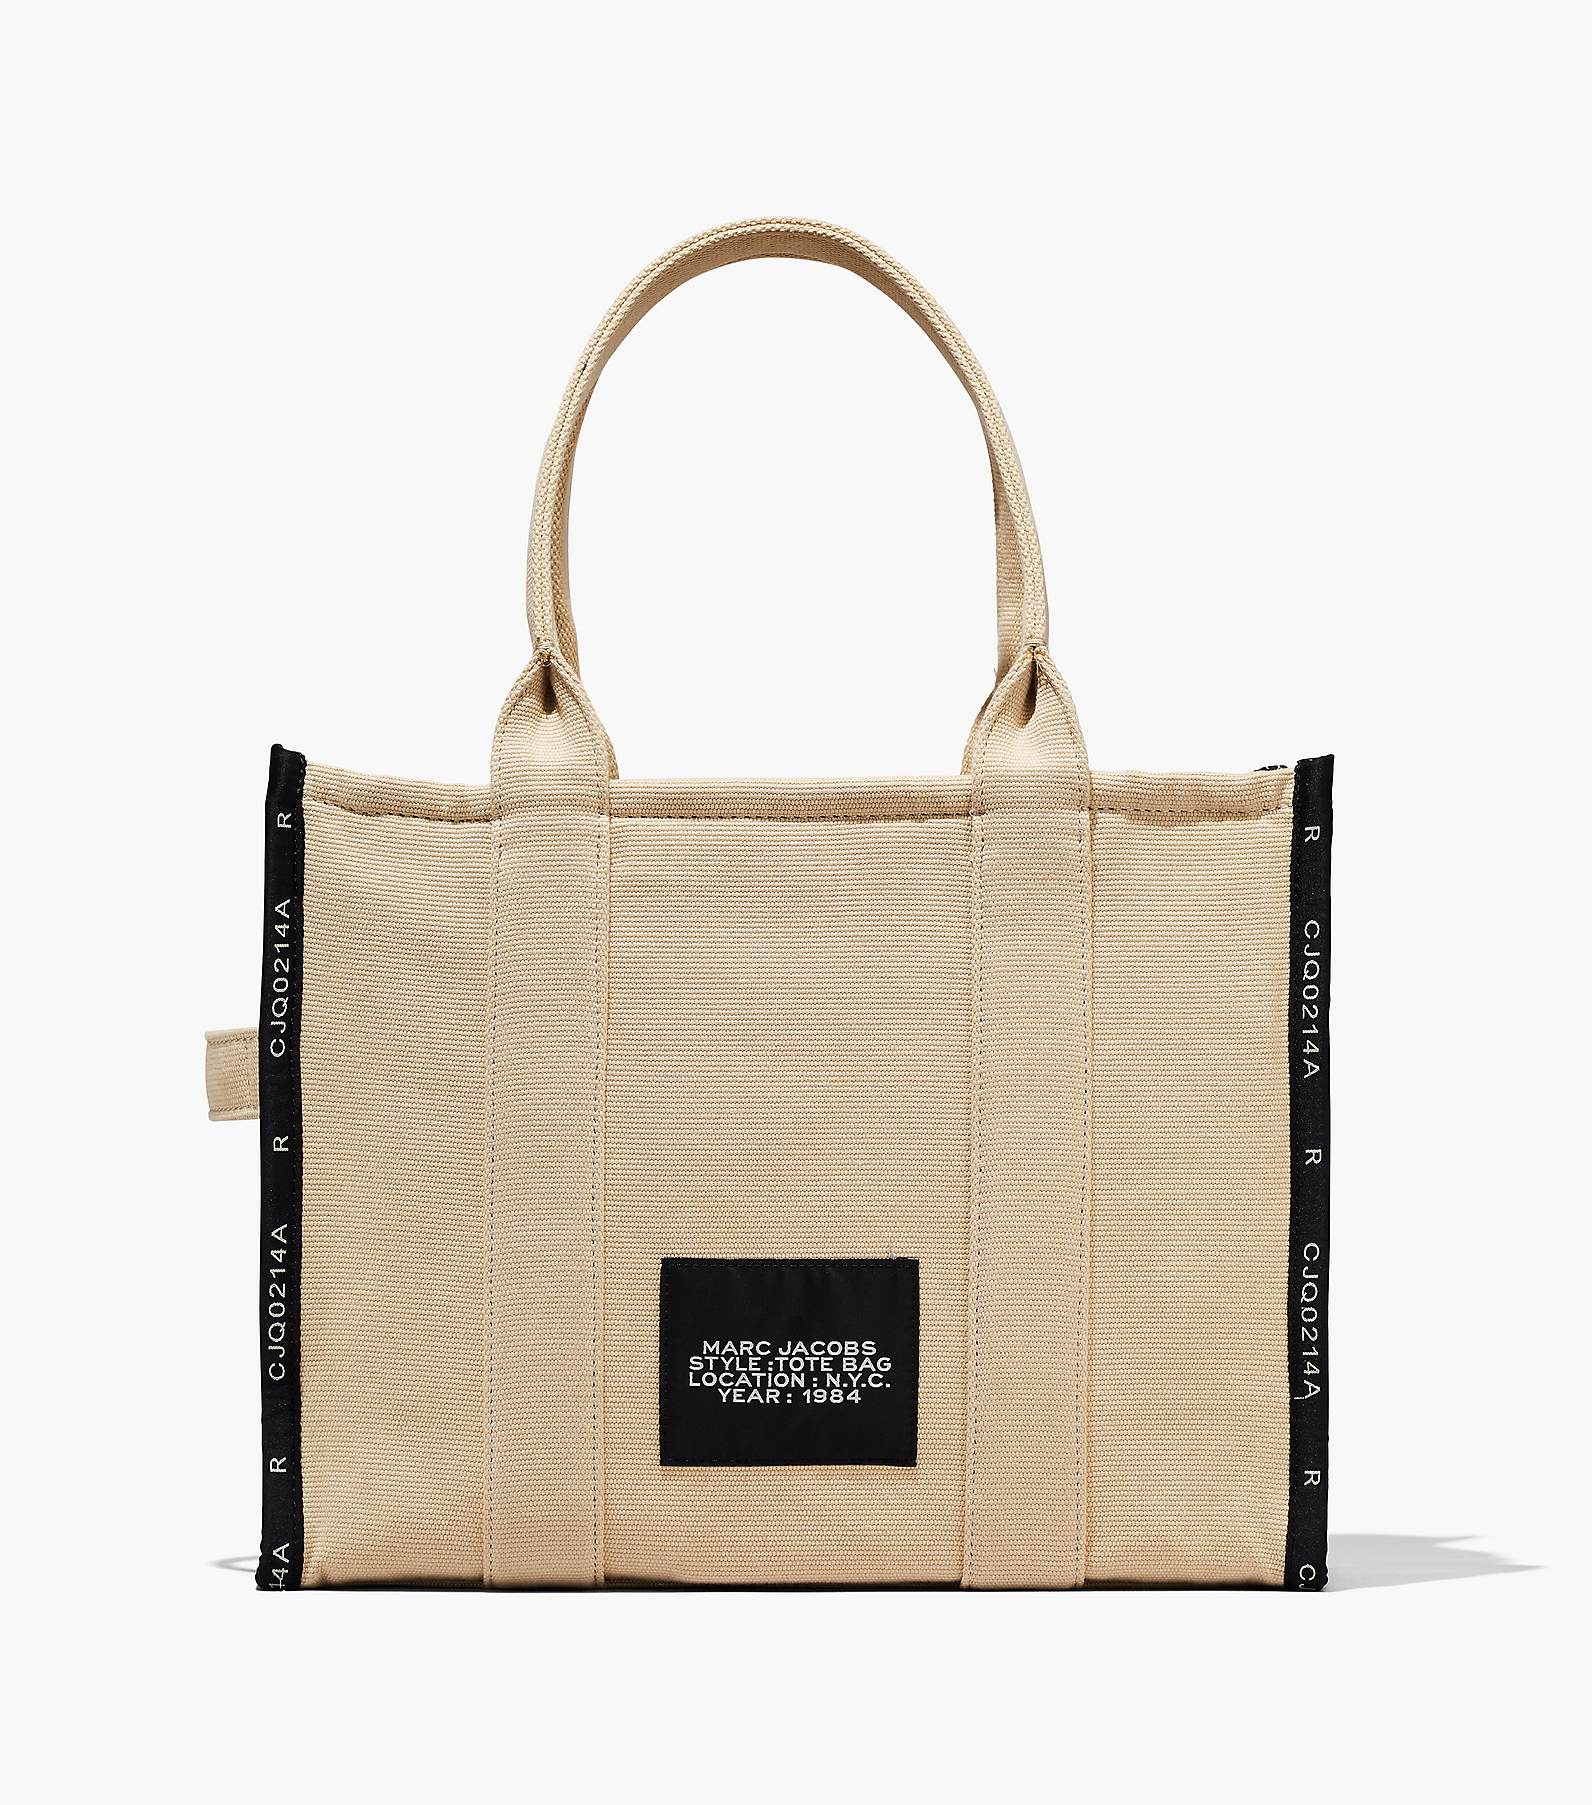 The Large leather tote bag in brown - Marc Jacobs